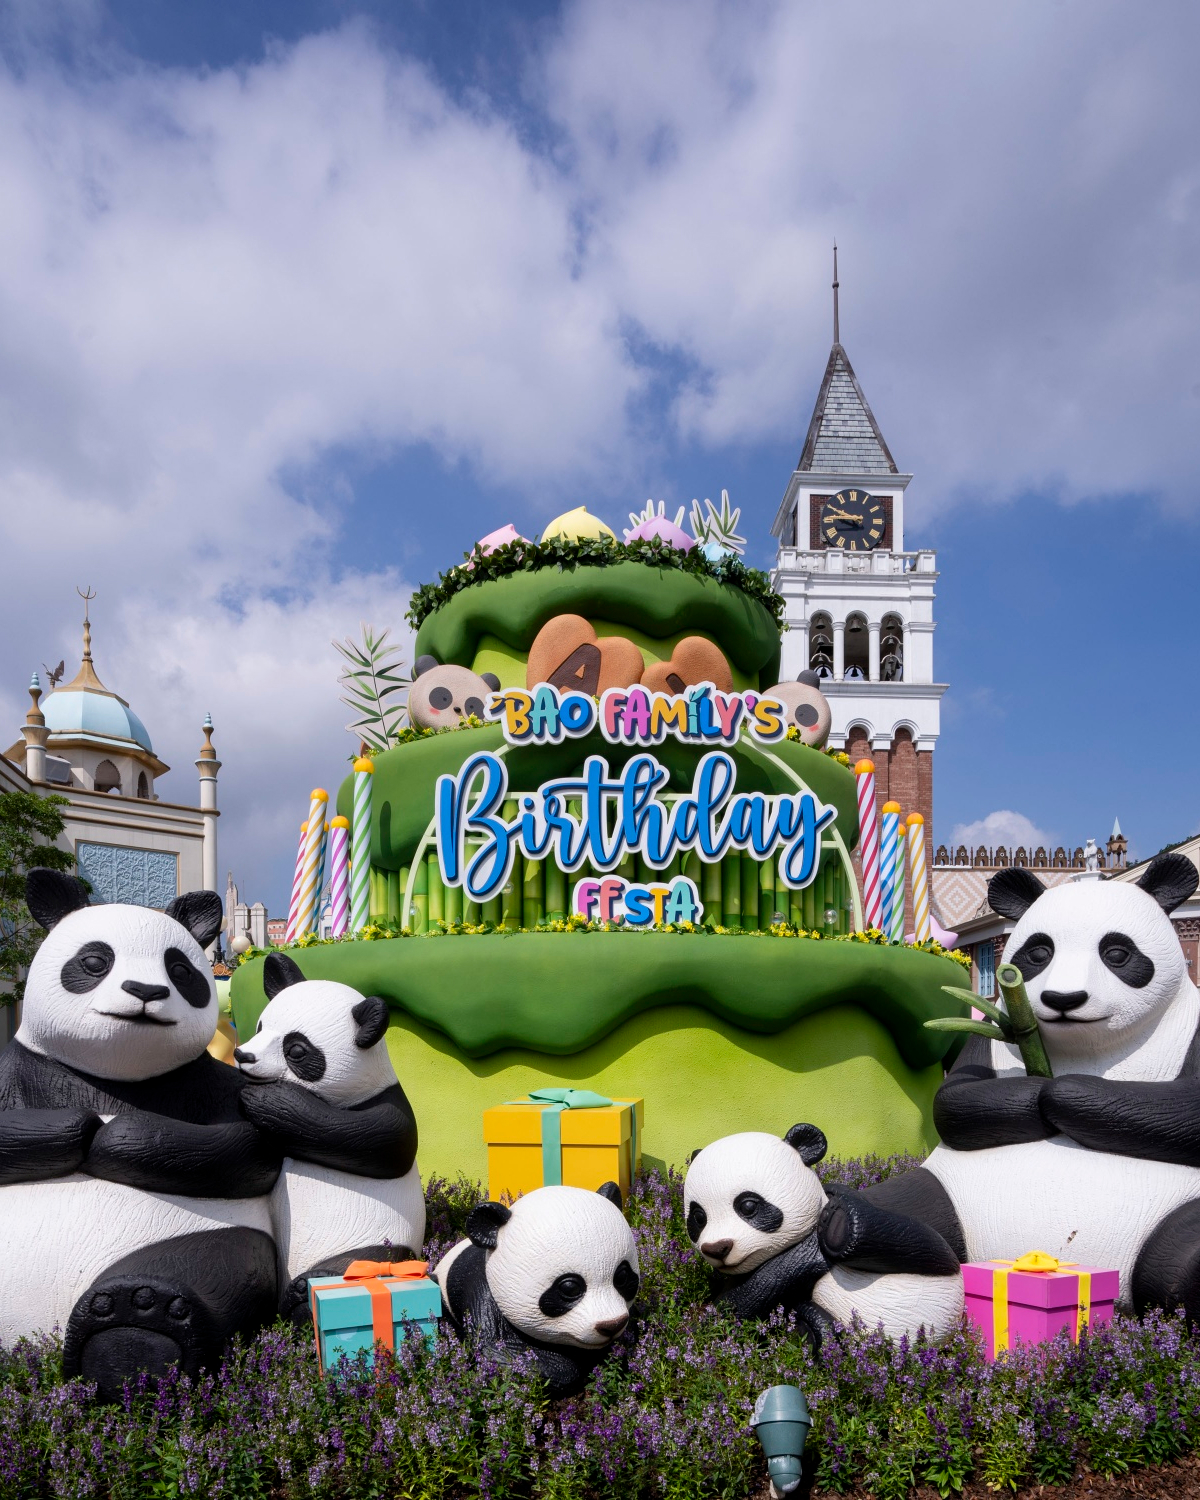 Panda birthday decorations are on display throughout Everland